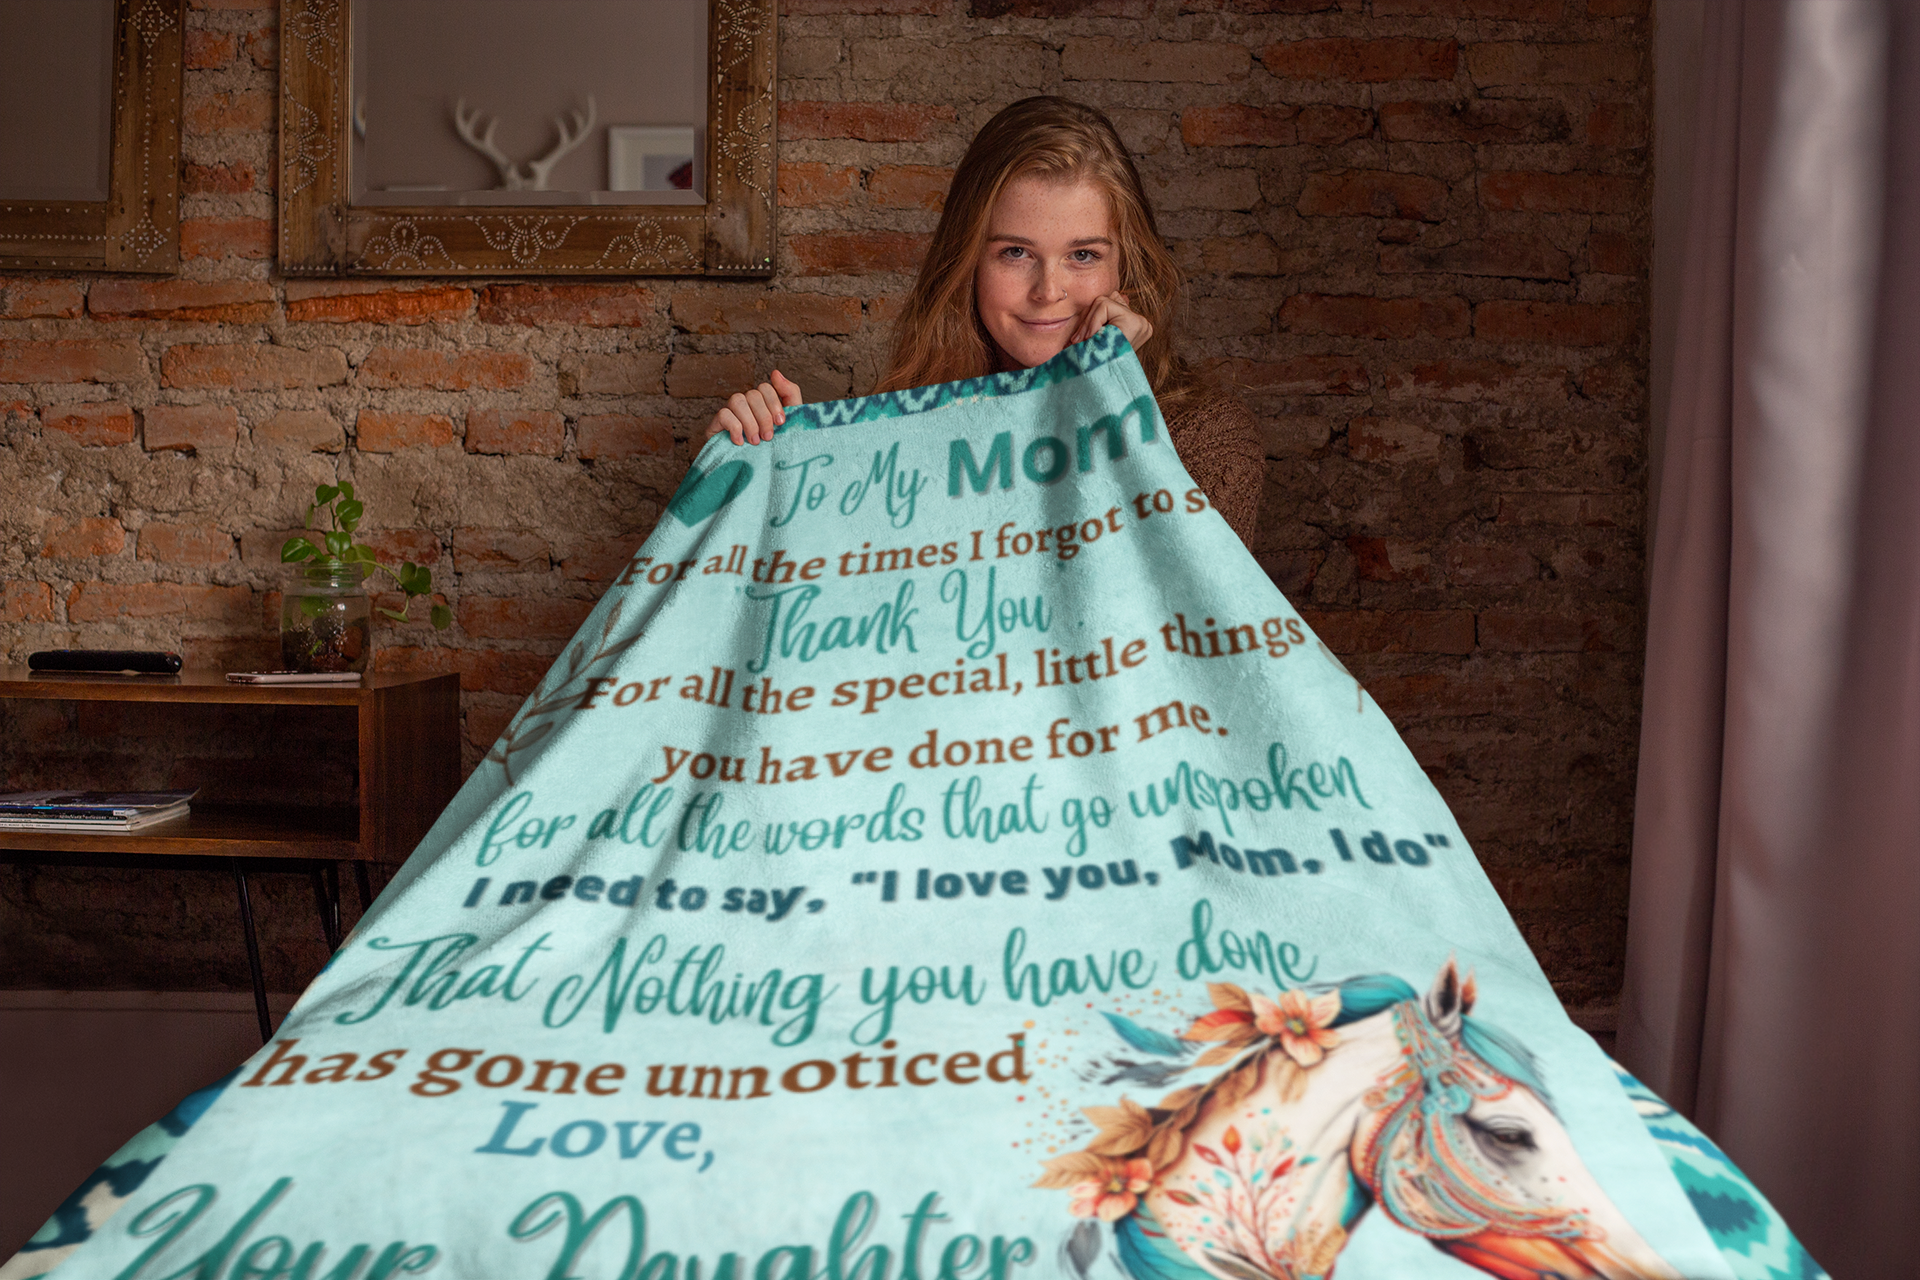  Gifts for Mom I Love You Mom Blanket Birthday